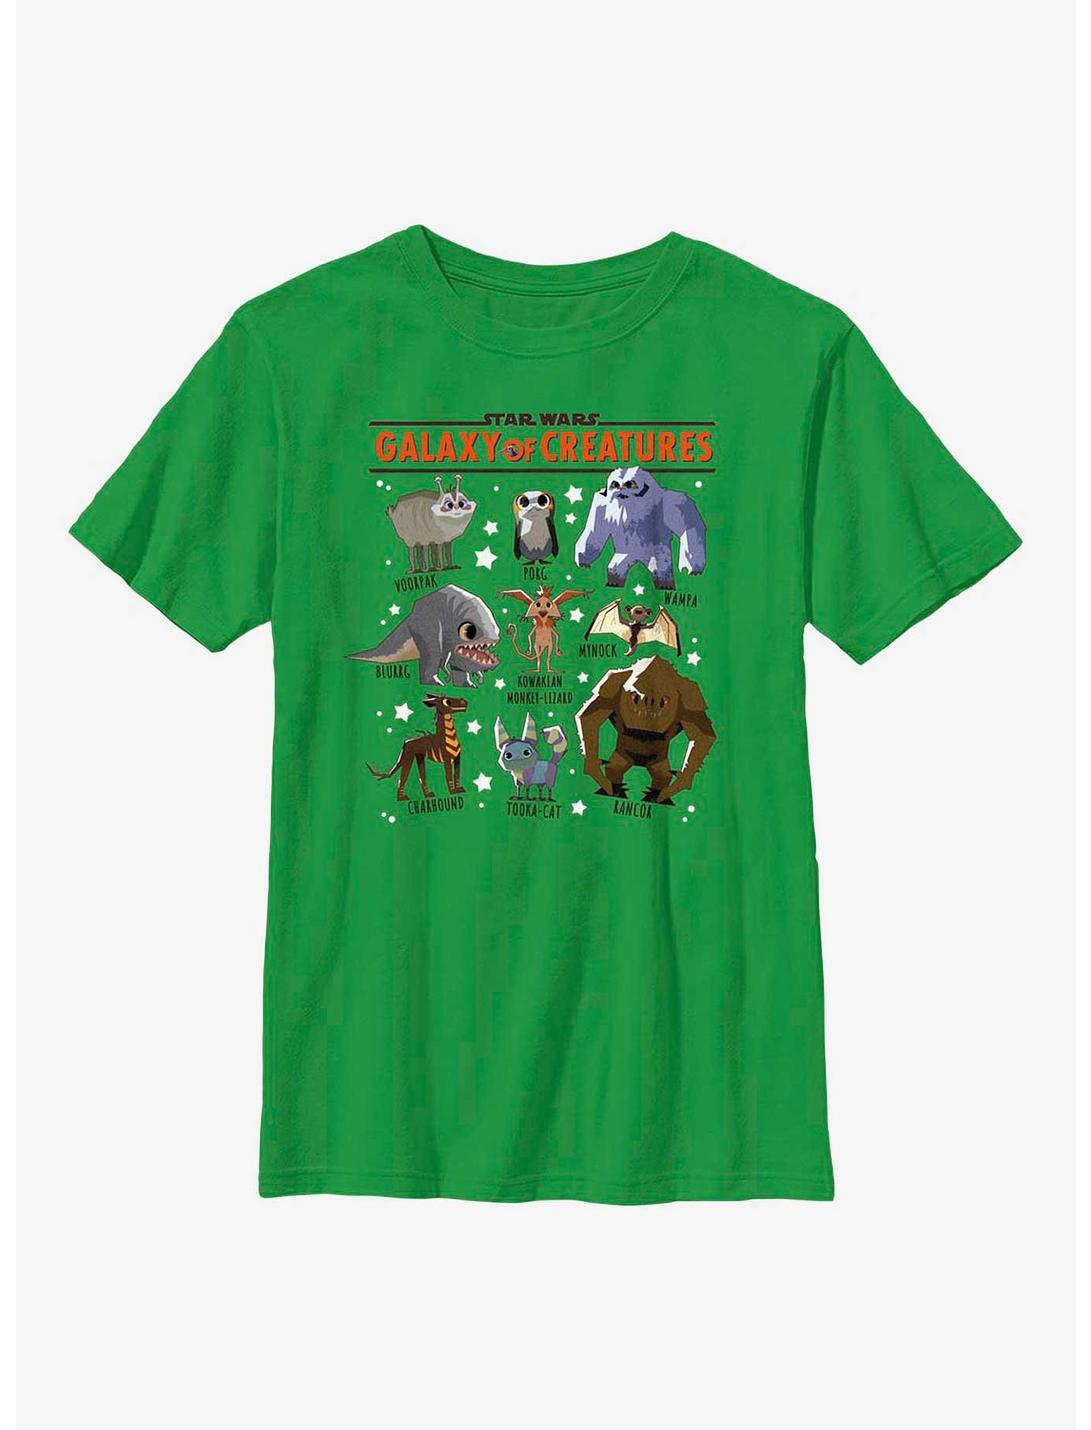 Star Wars Galaxy Of Creatures Creature Textbook Youth T-Shirt, KELLY, hi-res